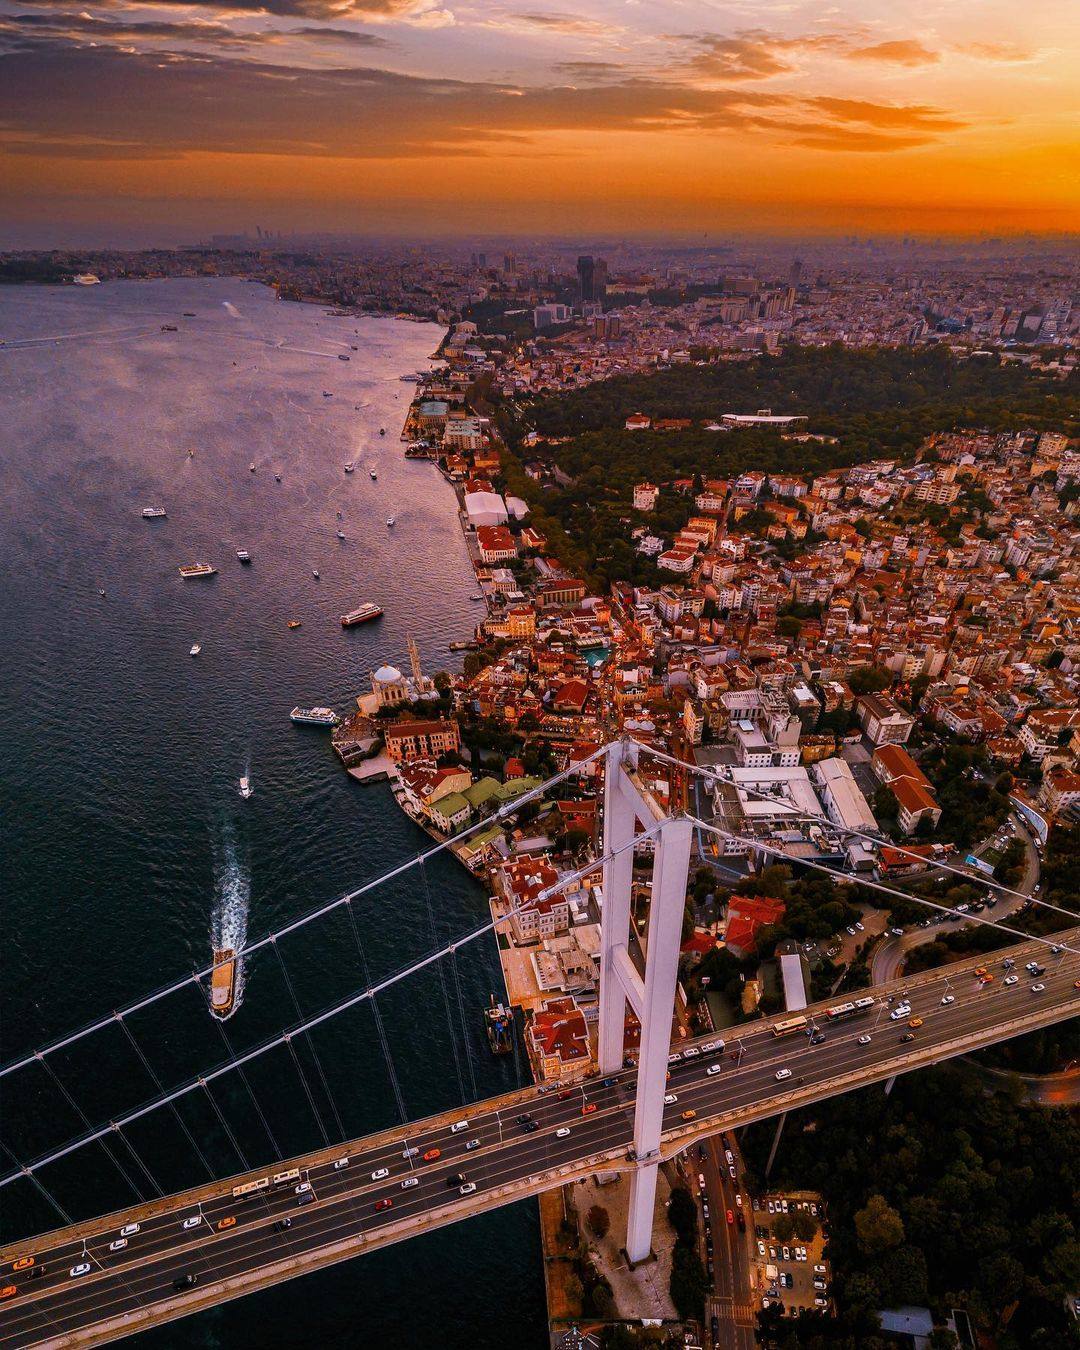 Istanbul has long been known as the ultimate historical and cultural melting pot of the world. Go for a walk along the Bosphorus or grab coffee at Bebek. Photo: @go__istanbul/Instagram